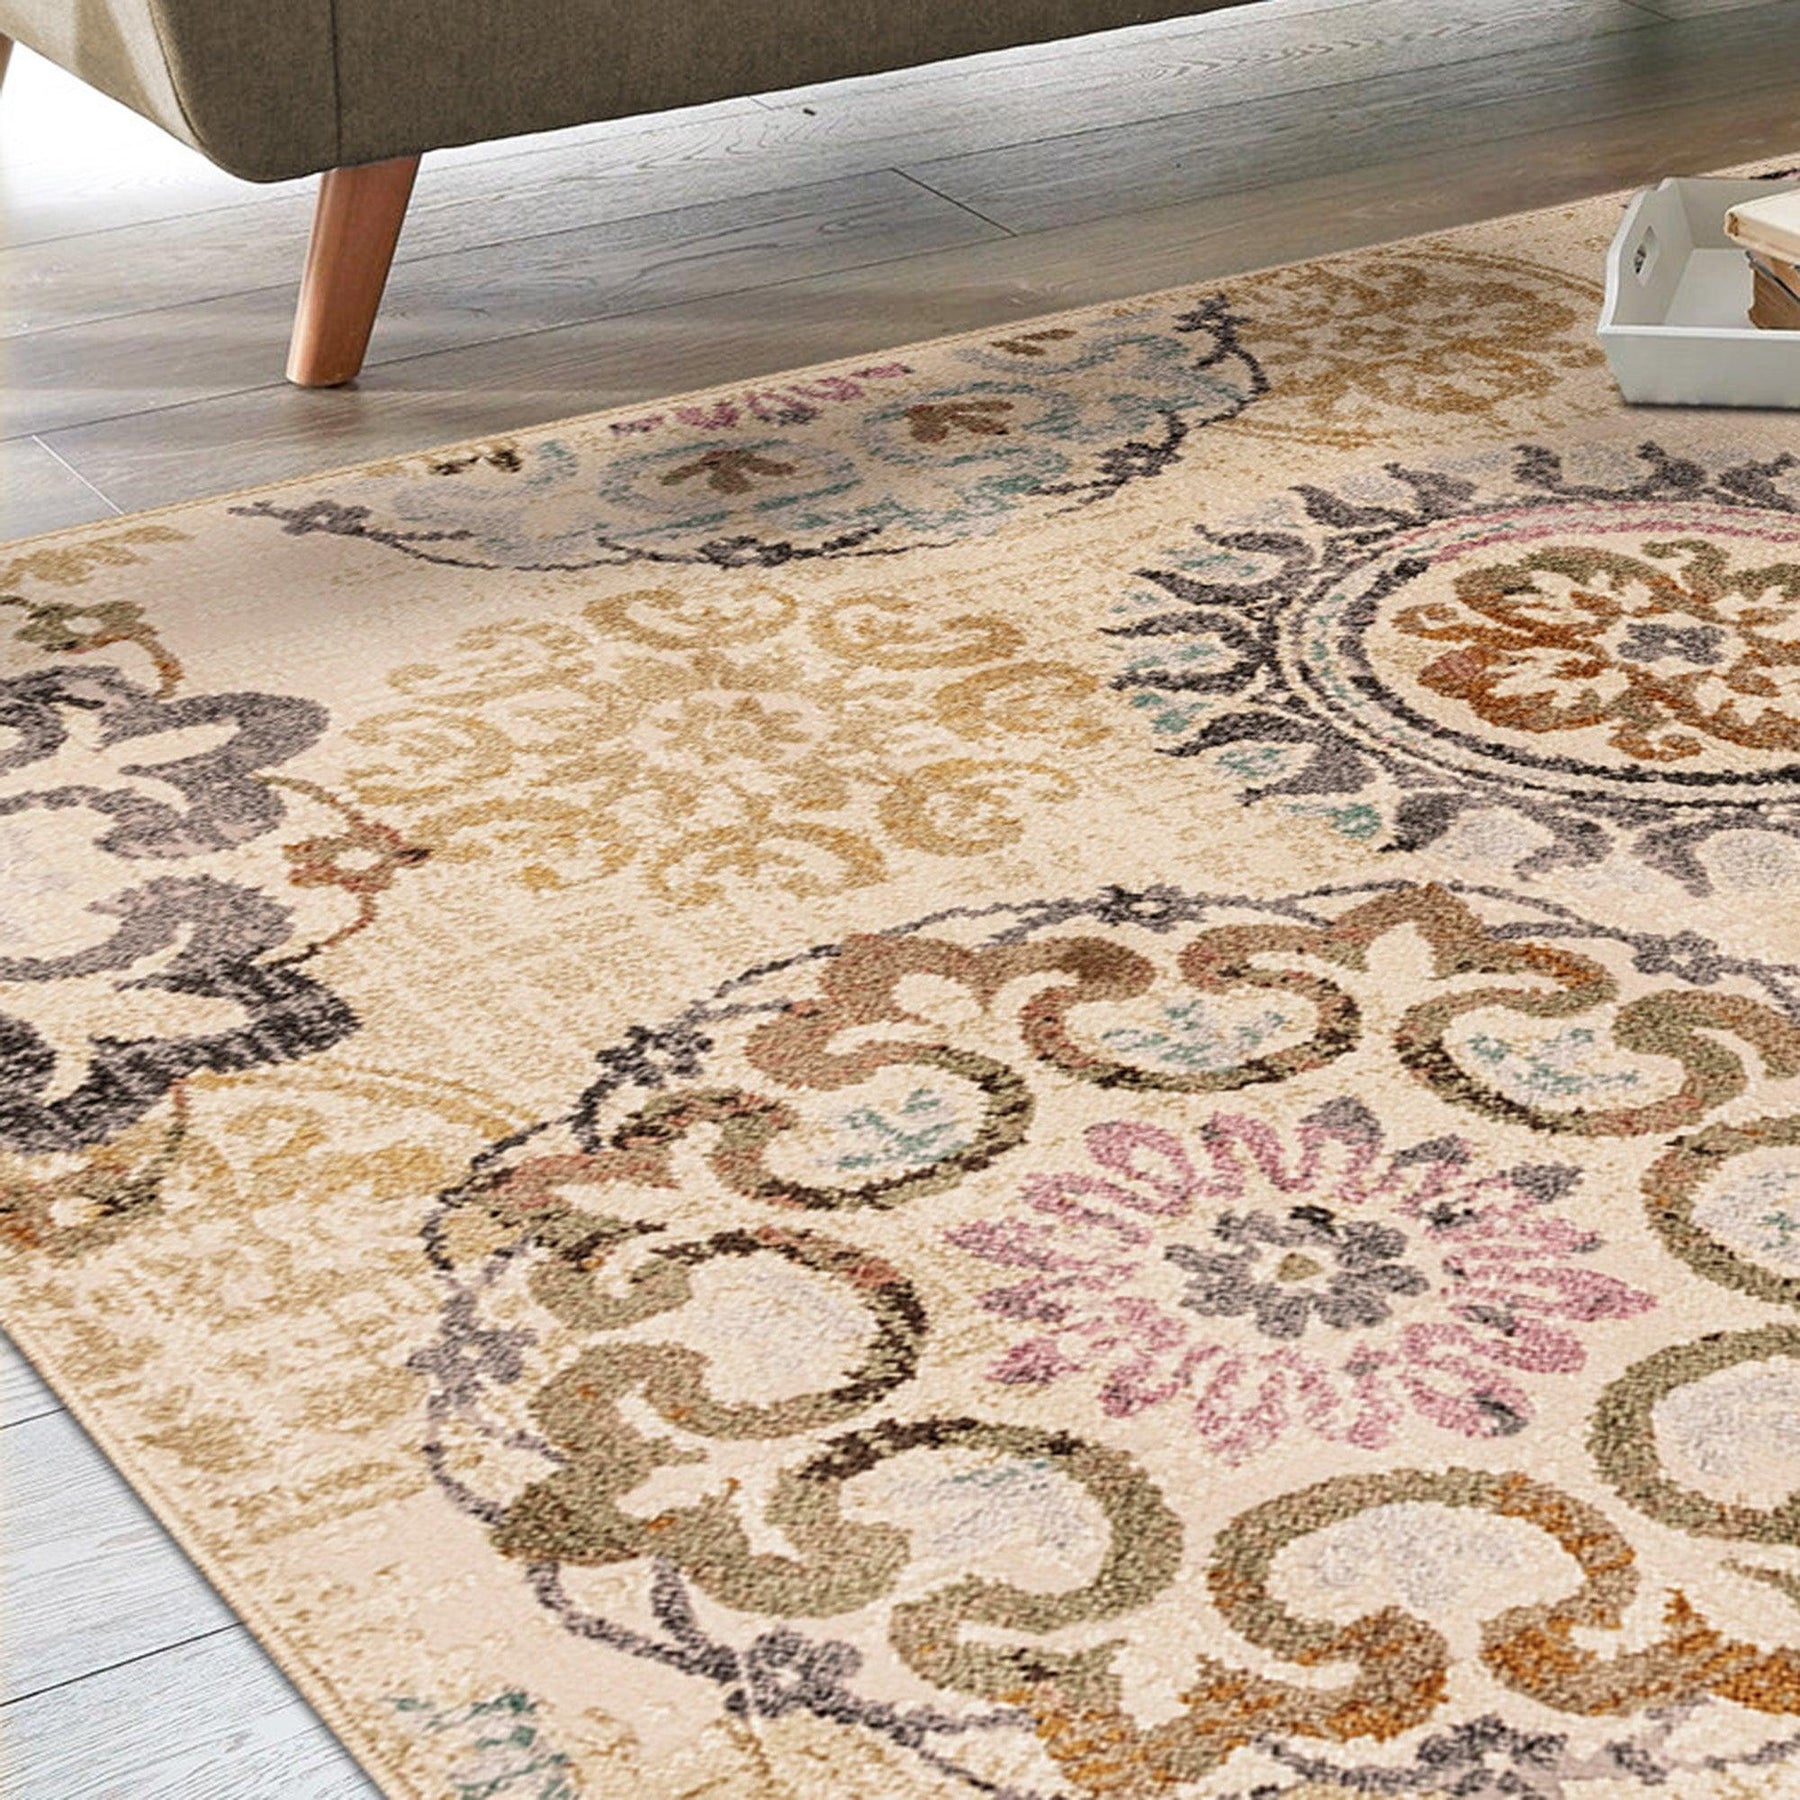 Superior Ceyone Distressed Floral Medallion Area Rug - Ivory